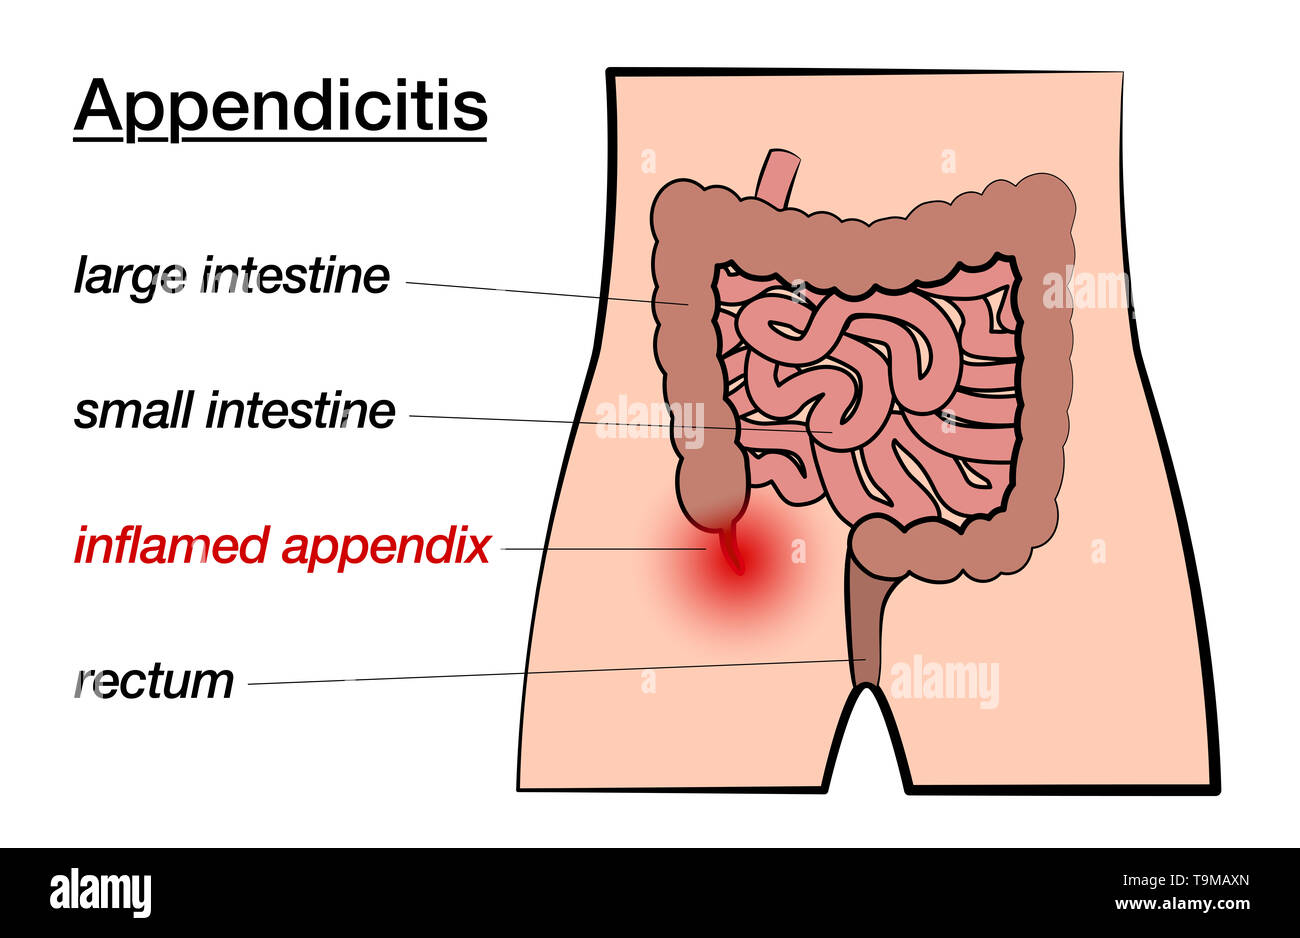 Appendicitis. Inflamed appendix. Labeled chart with large and small intestine, appendix and rectum on white background. Stock Photo